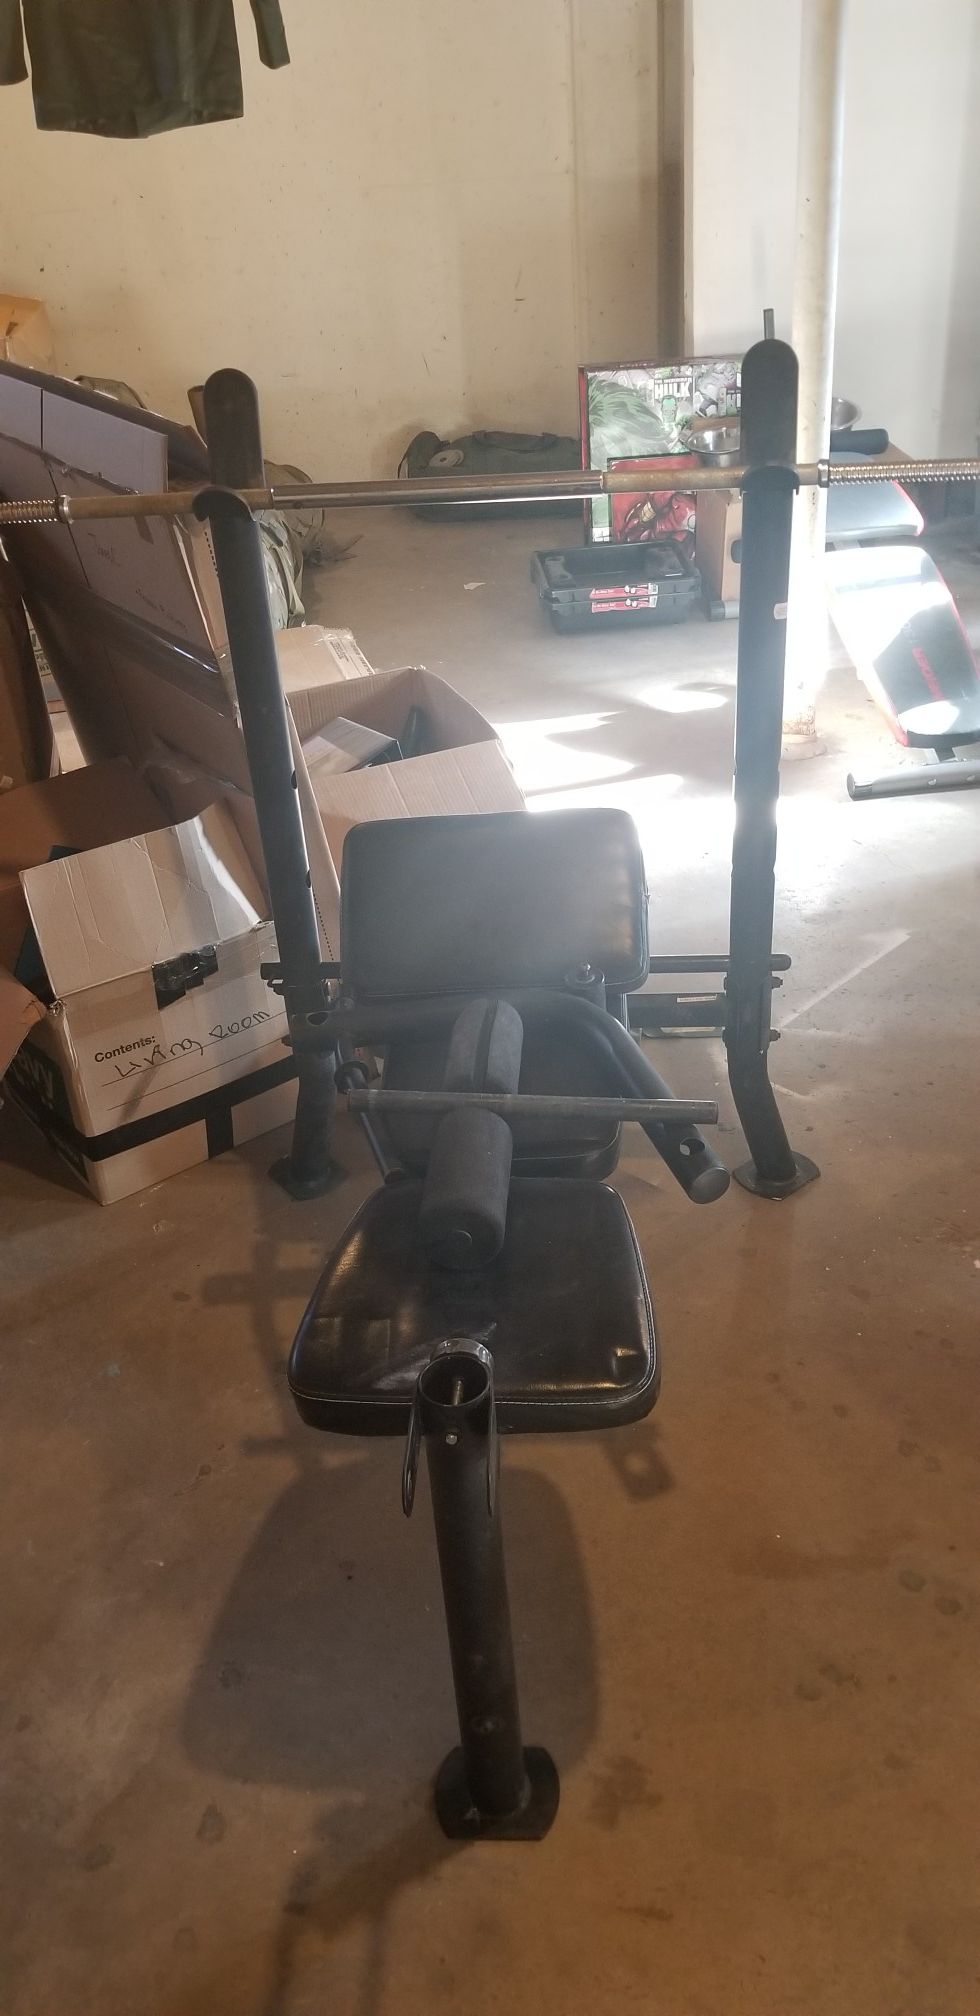 weight bench with bar